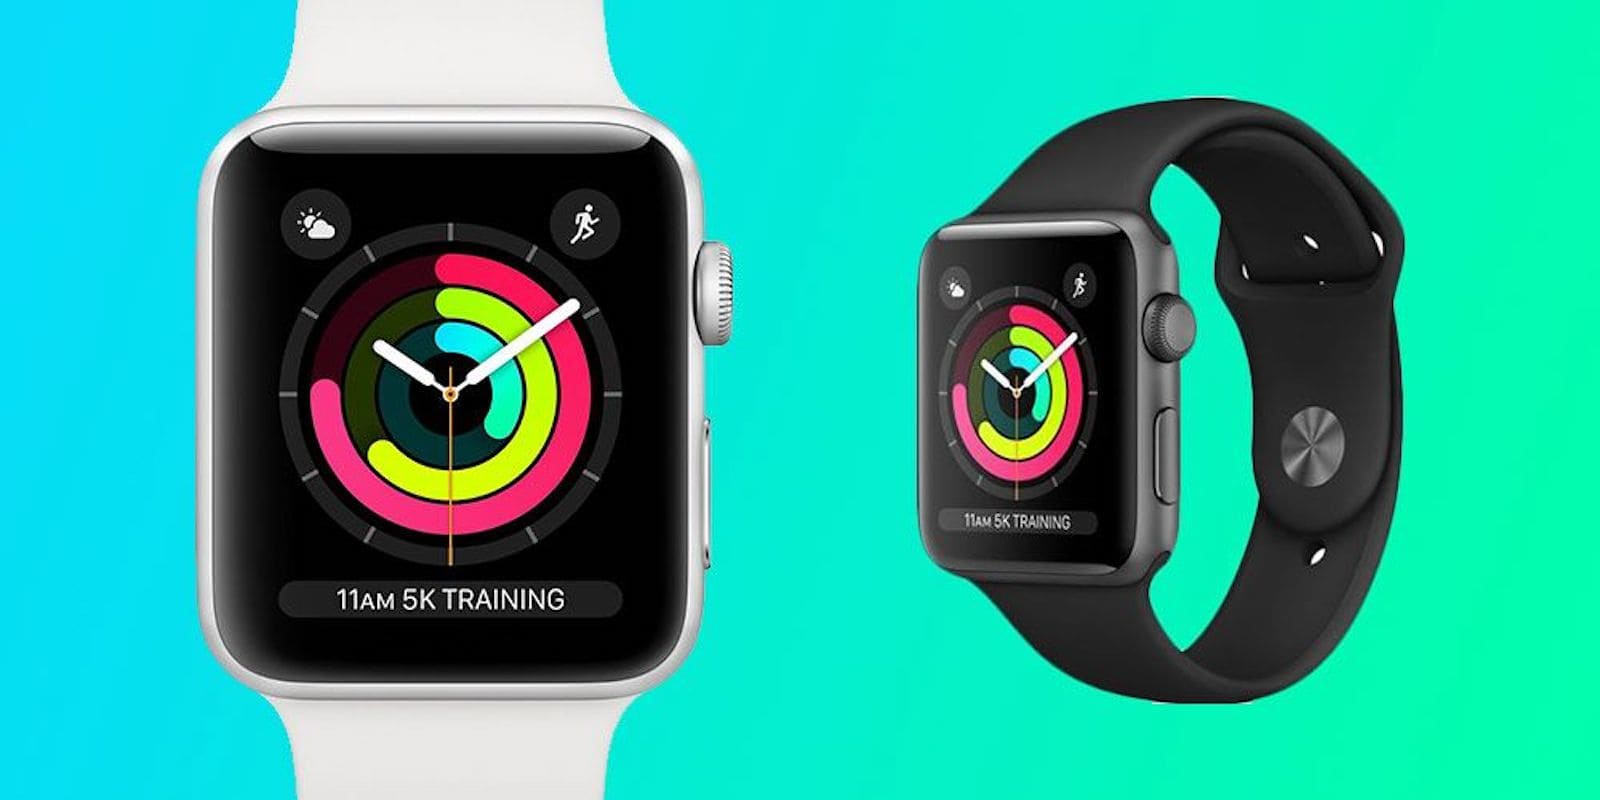 Now's a great time to swipe up the outgoing model of Apple Watch.